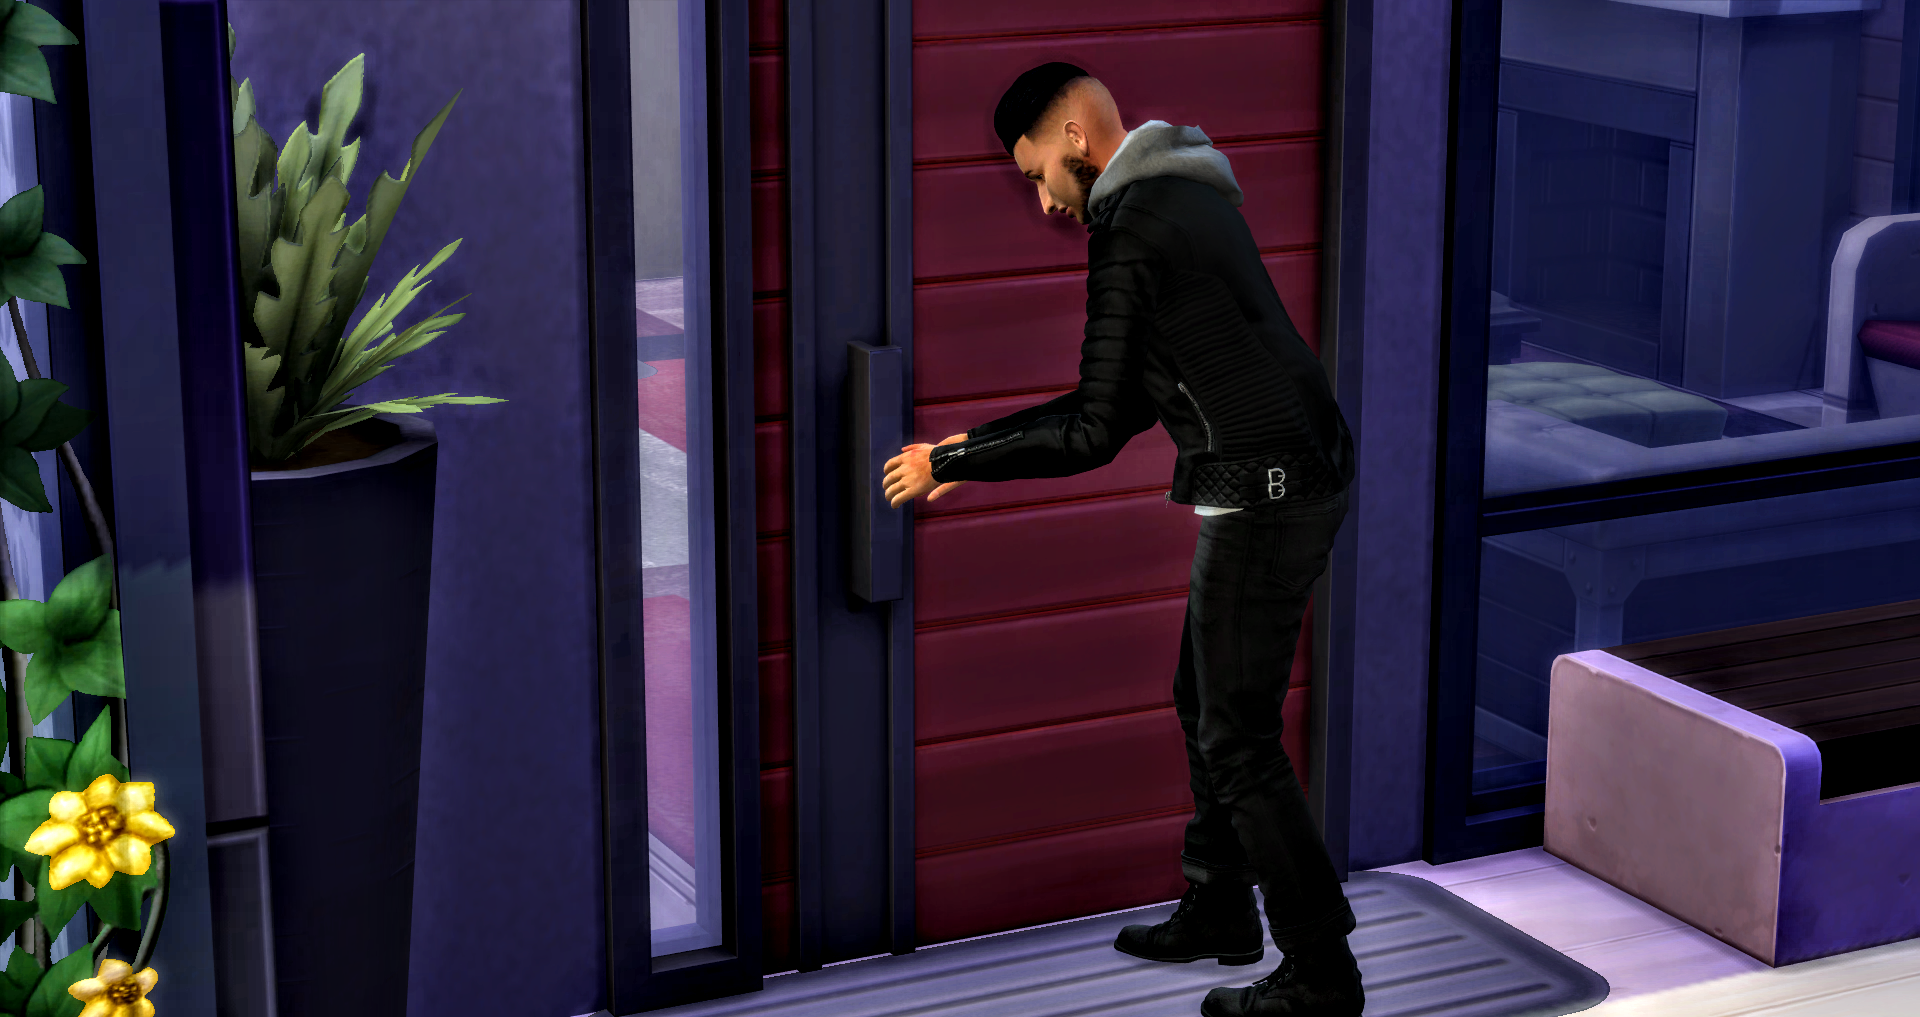 the sims 4 life tragedies mod download